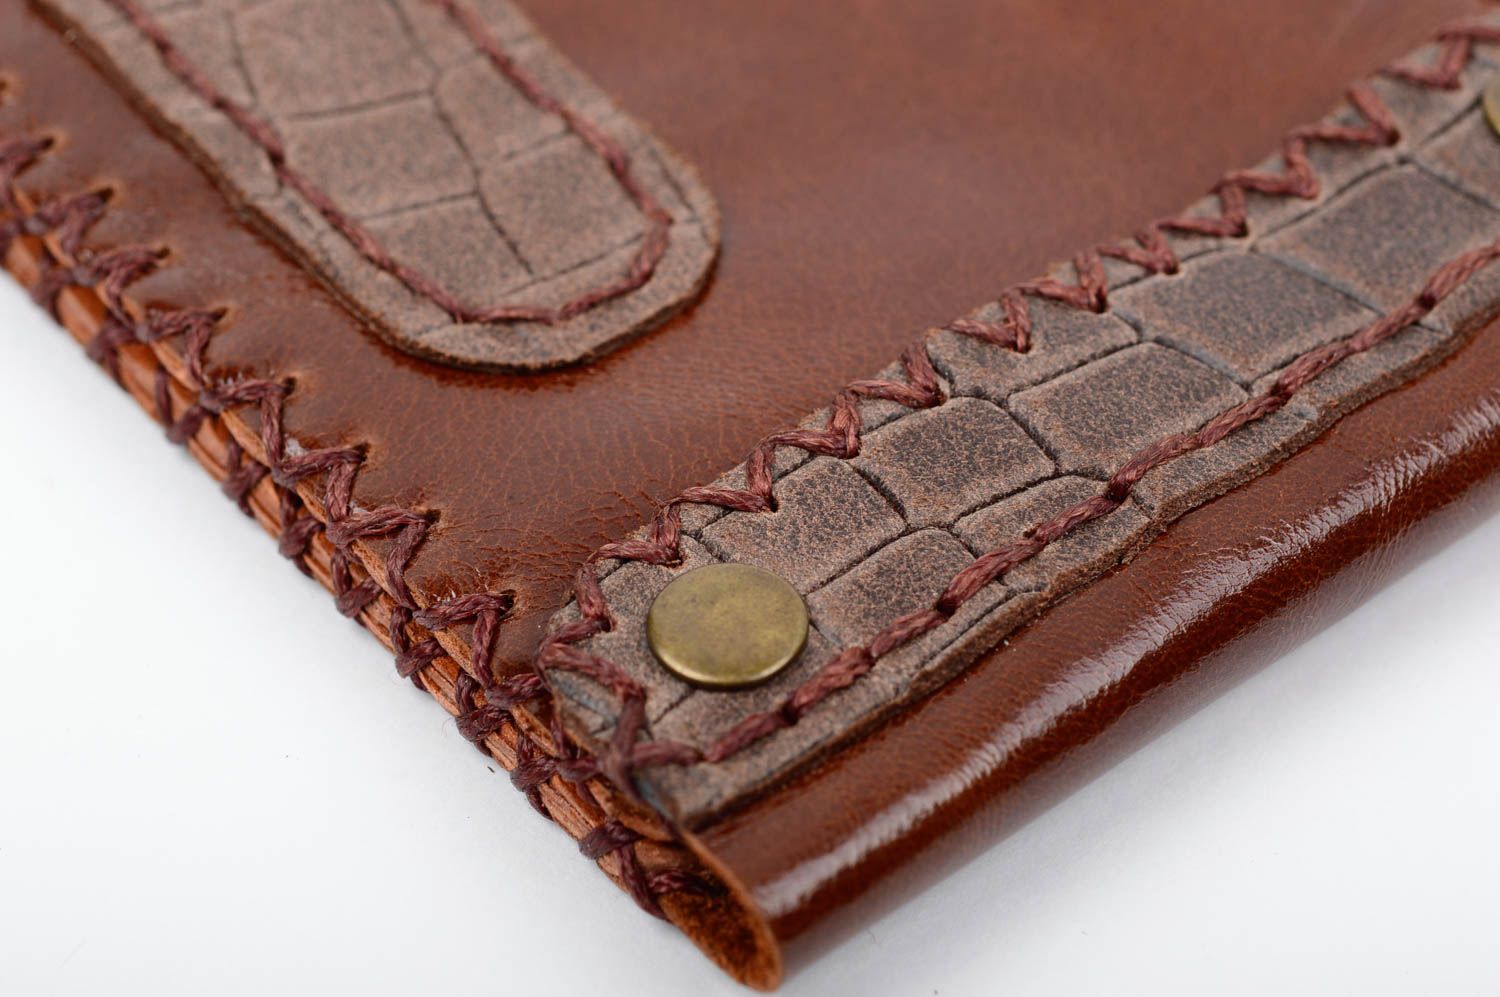 Unusual handmade leather wallet designer accessories leather goods gift ideas photo 3